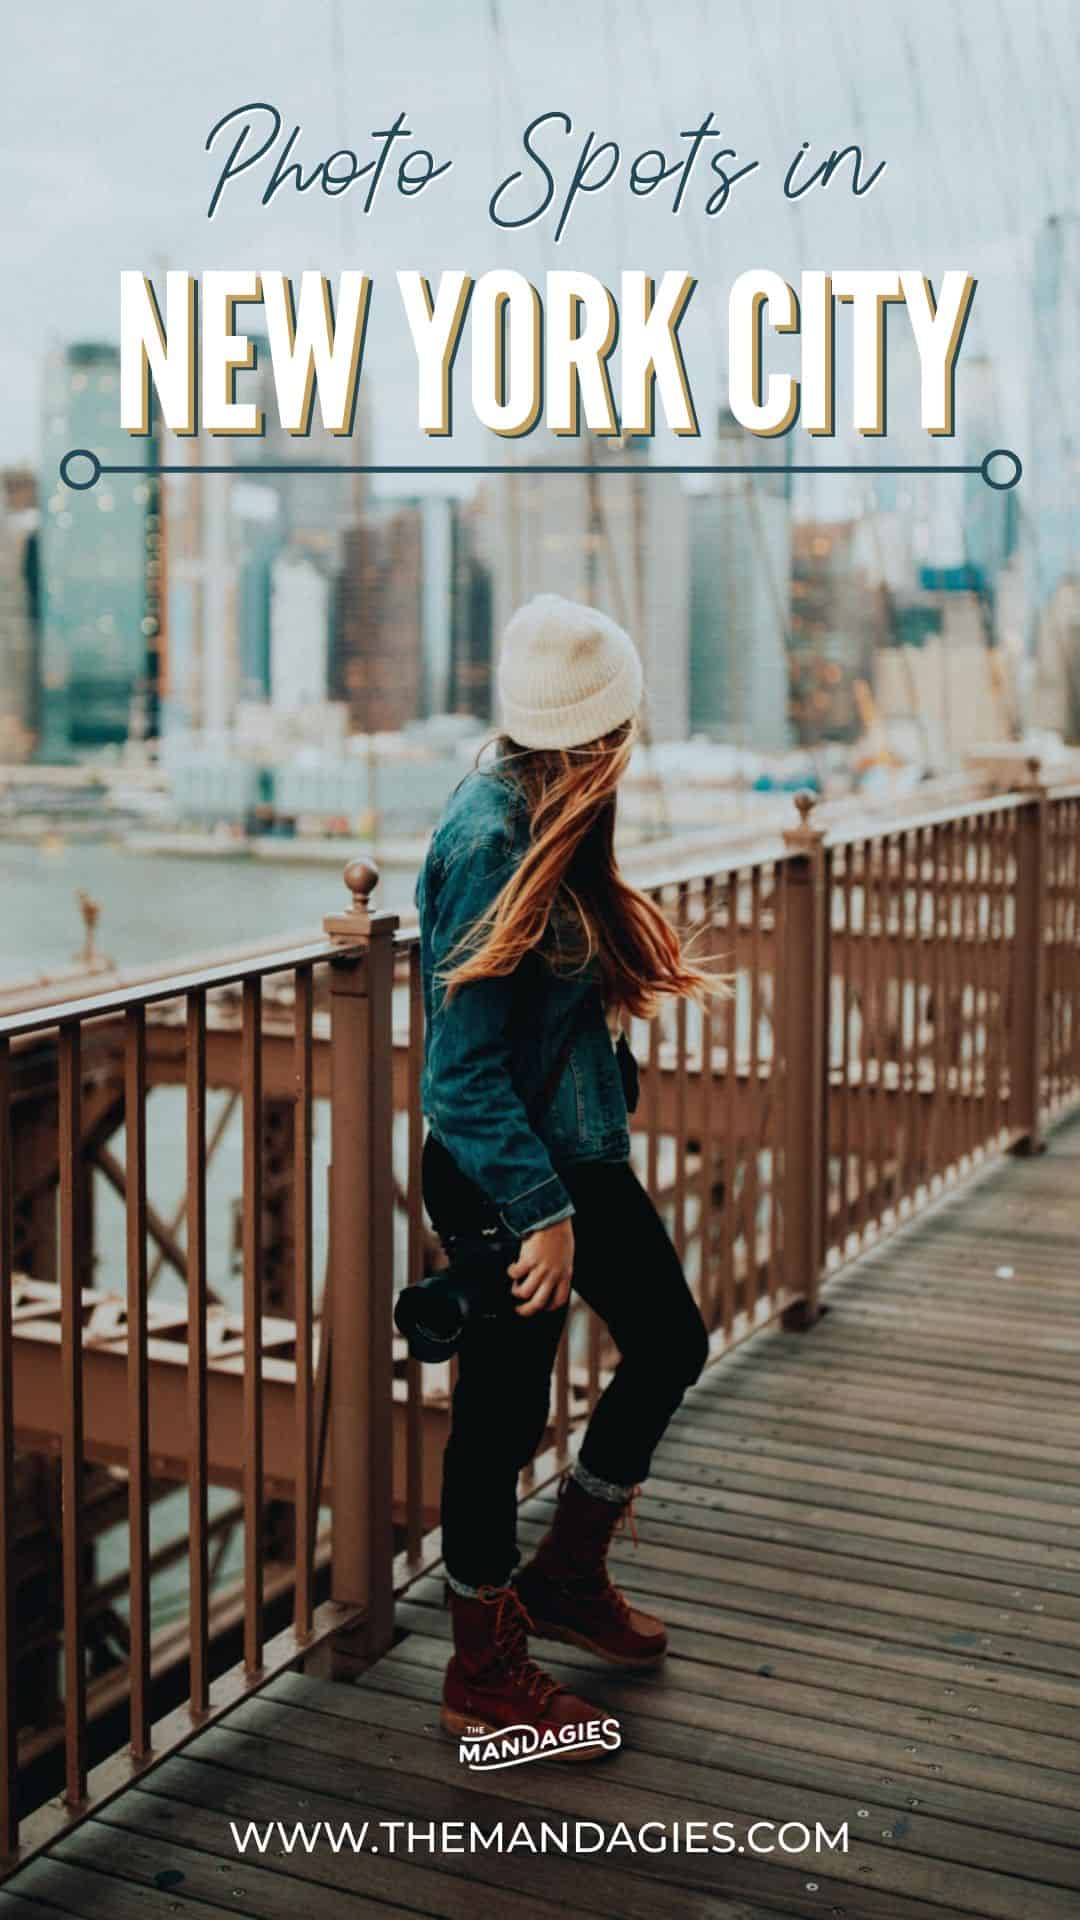 Planning a trip to NYC and ready to take some photos? We're sharing the best Instagram spots in NYC, including iconic buildings like The Flatiron Building, Brooklyn Bridge, Empire State Building, and Grand Central Station! Save this post for the best bucket list photography spots in NYC to plan your best trip yet! #instagram #NYC #newyorkcity #photography #NewYorkNewYork #Newyork #city #travel #photo #brooklynbridge #grandcentralstation